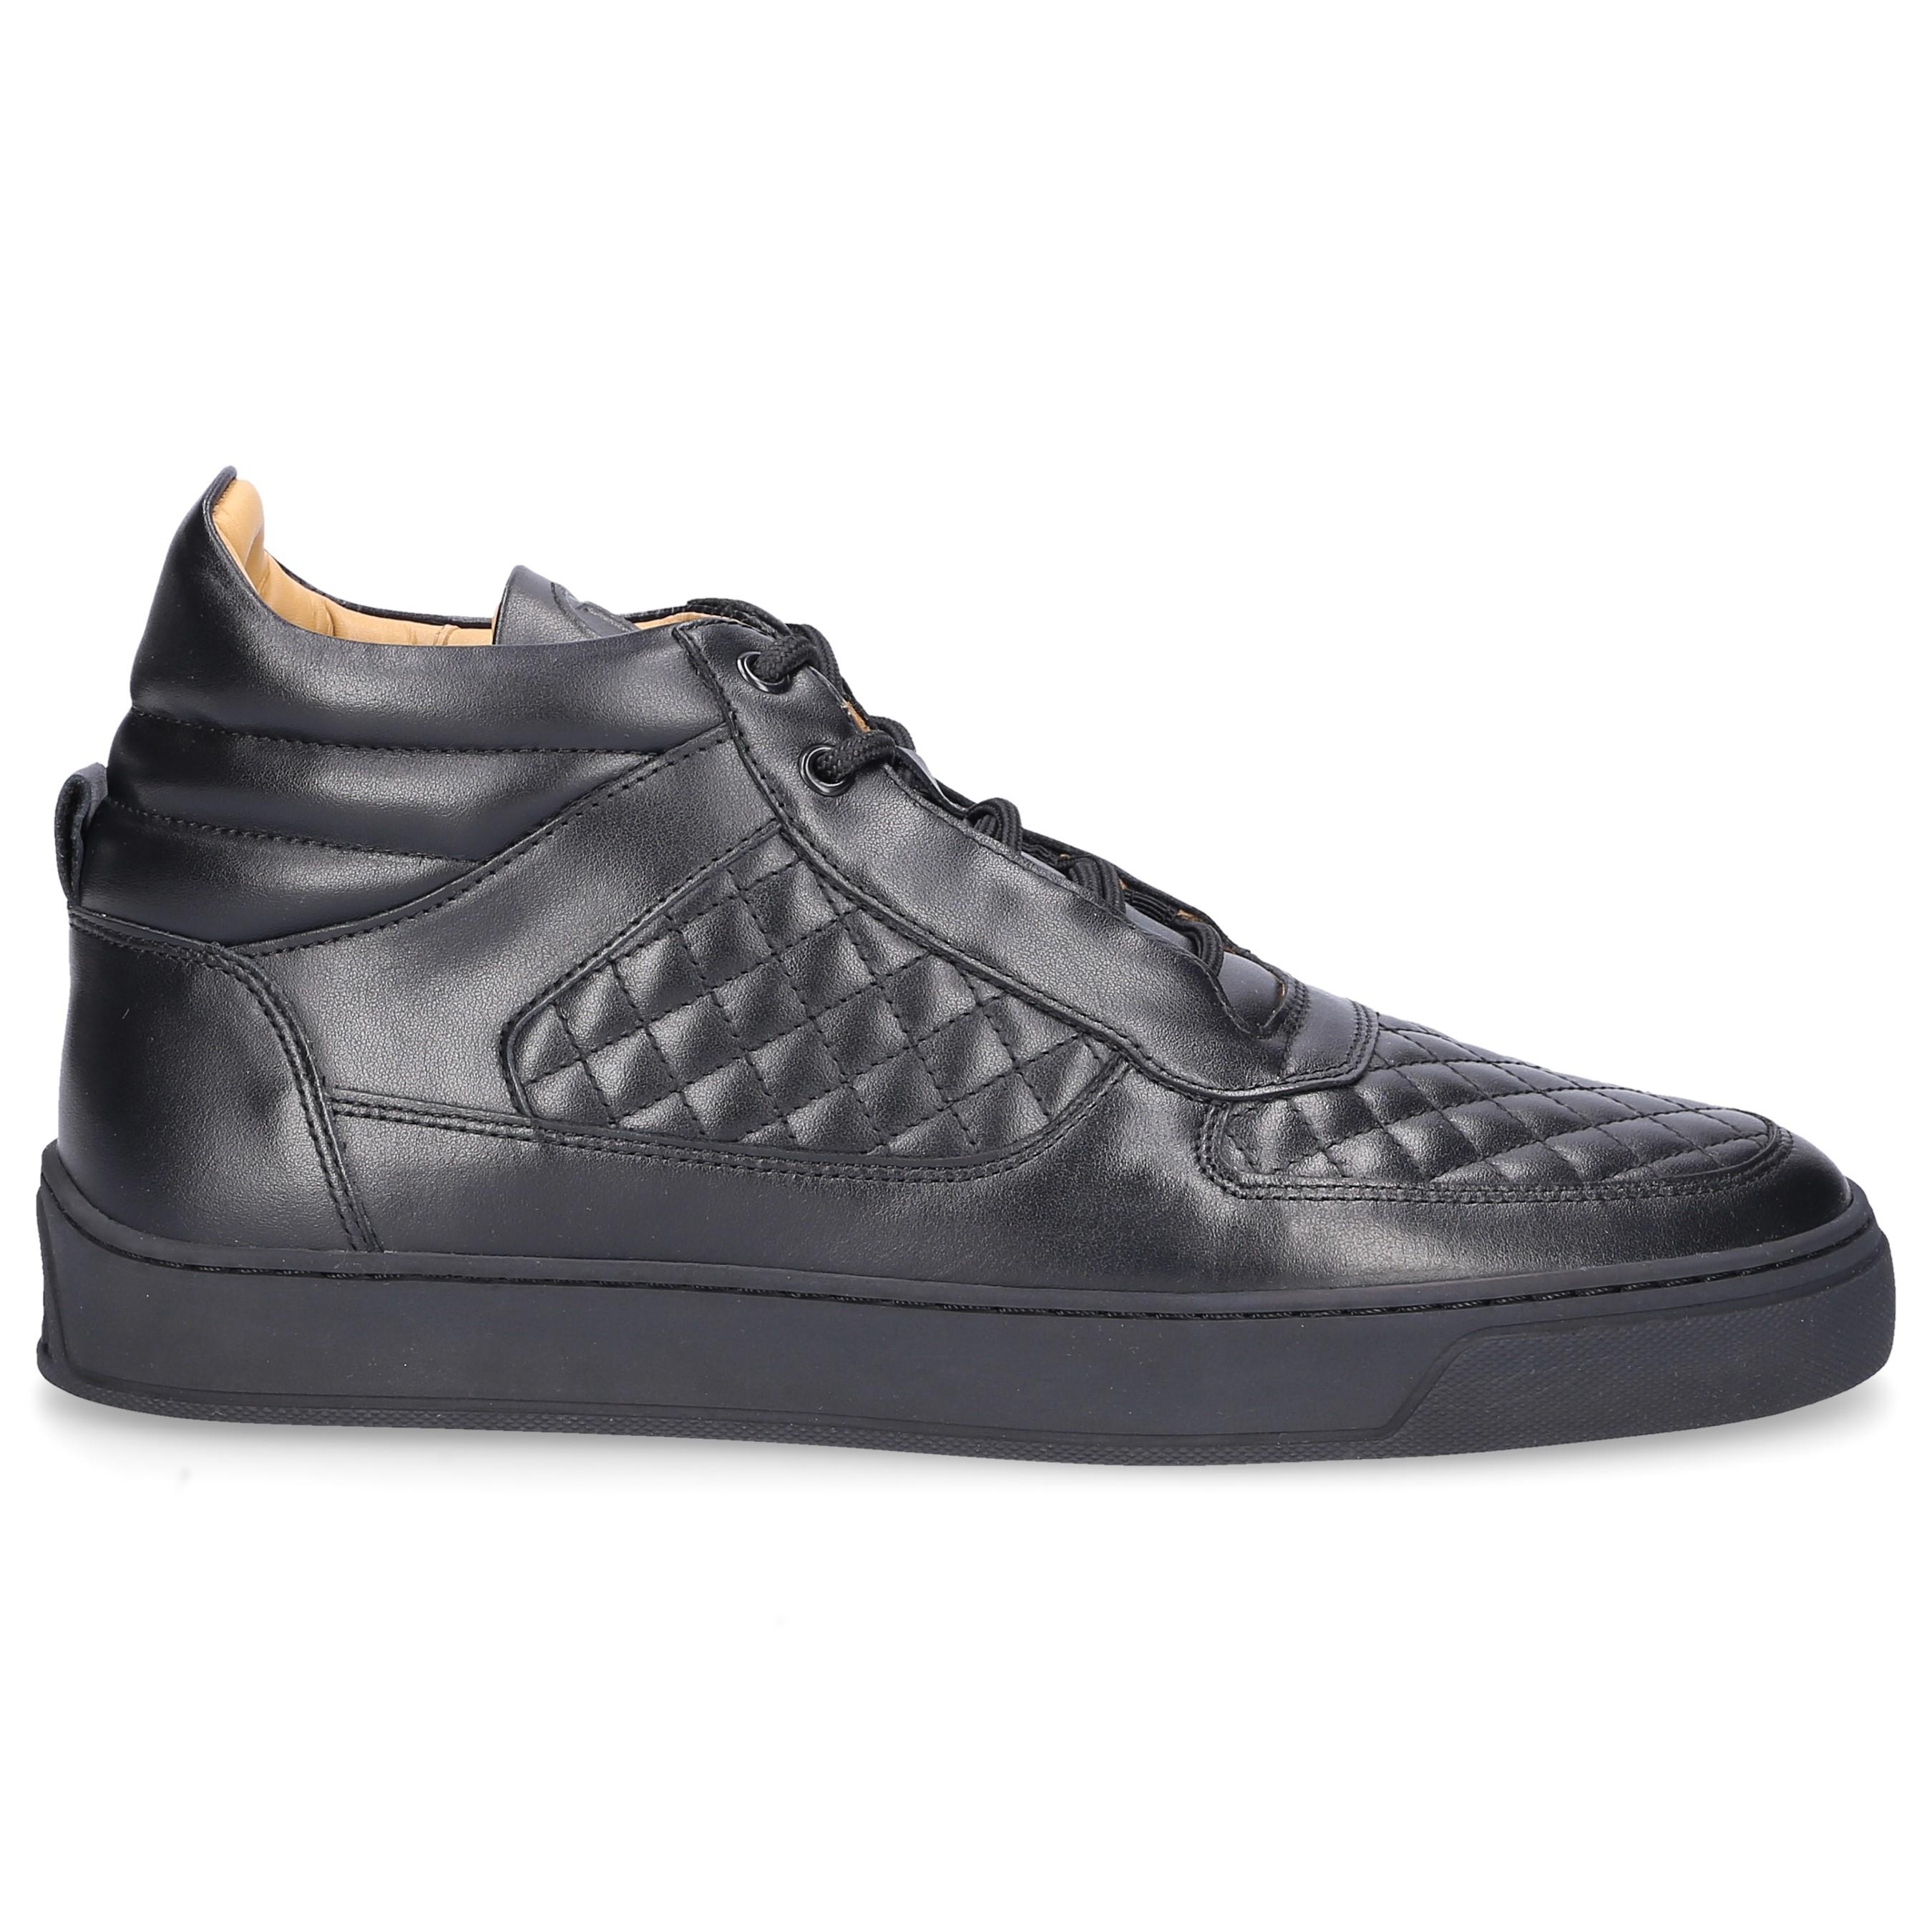 Leandro Lopes Leather Sneakers Black Faisca for Men - Lyst